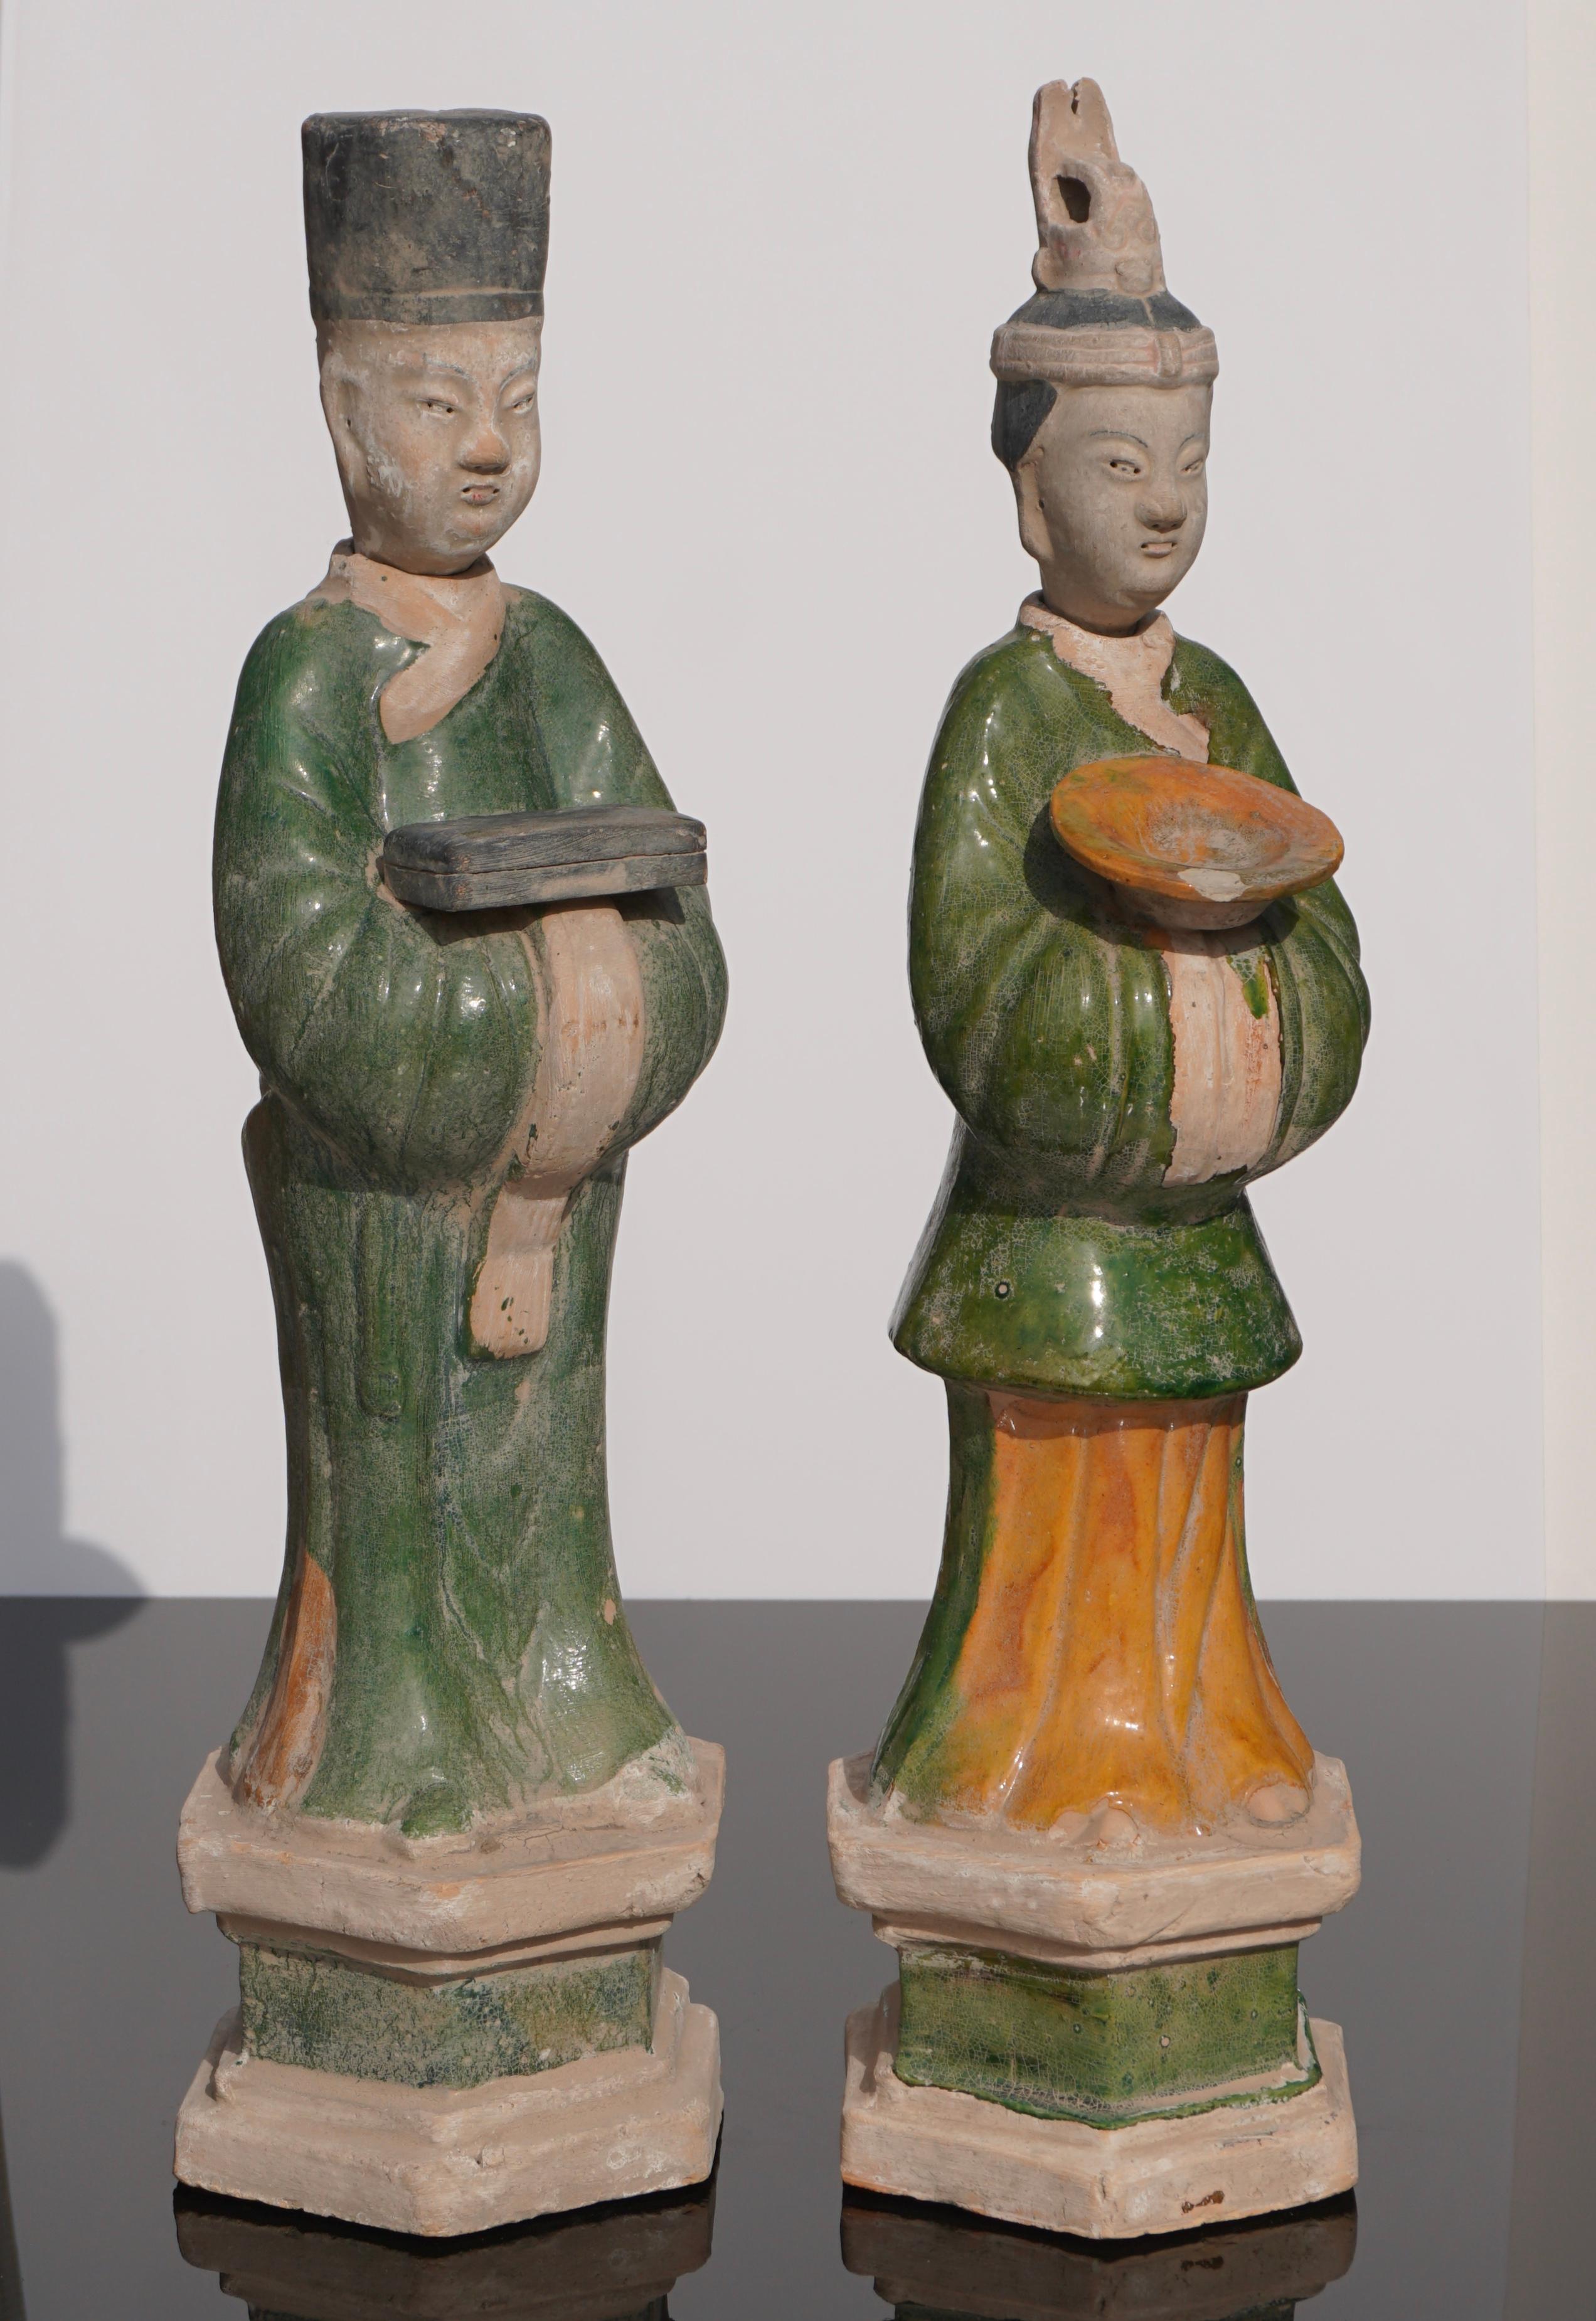 These two Sancai glazed figures in particular are distinguished by their dress, for each wears a unique robe and hat, and by the objects they carry in their arms (one holds a box, the other a bowl). As Chinese statuette art prescribes, the faces are